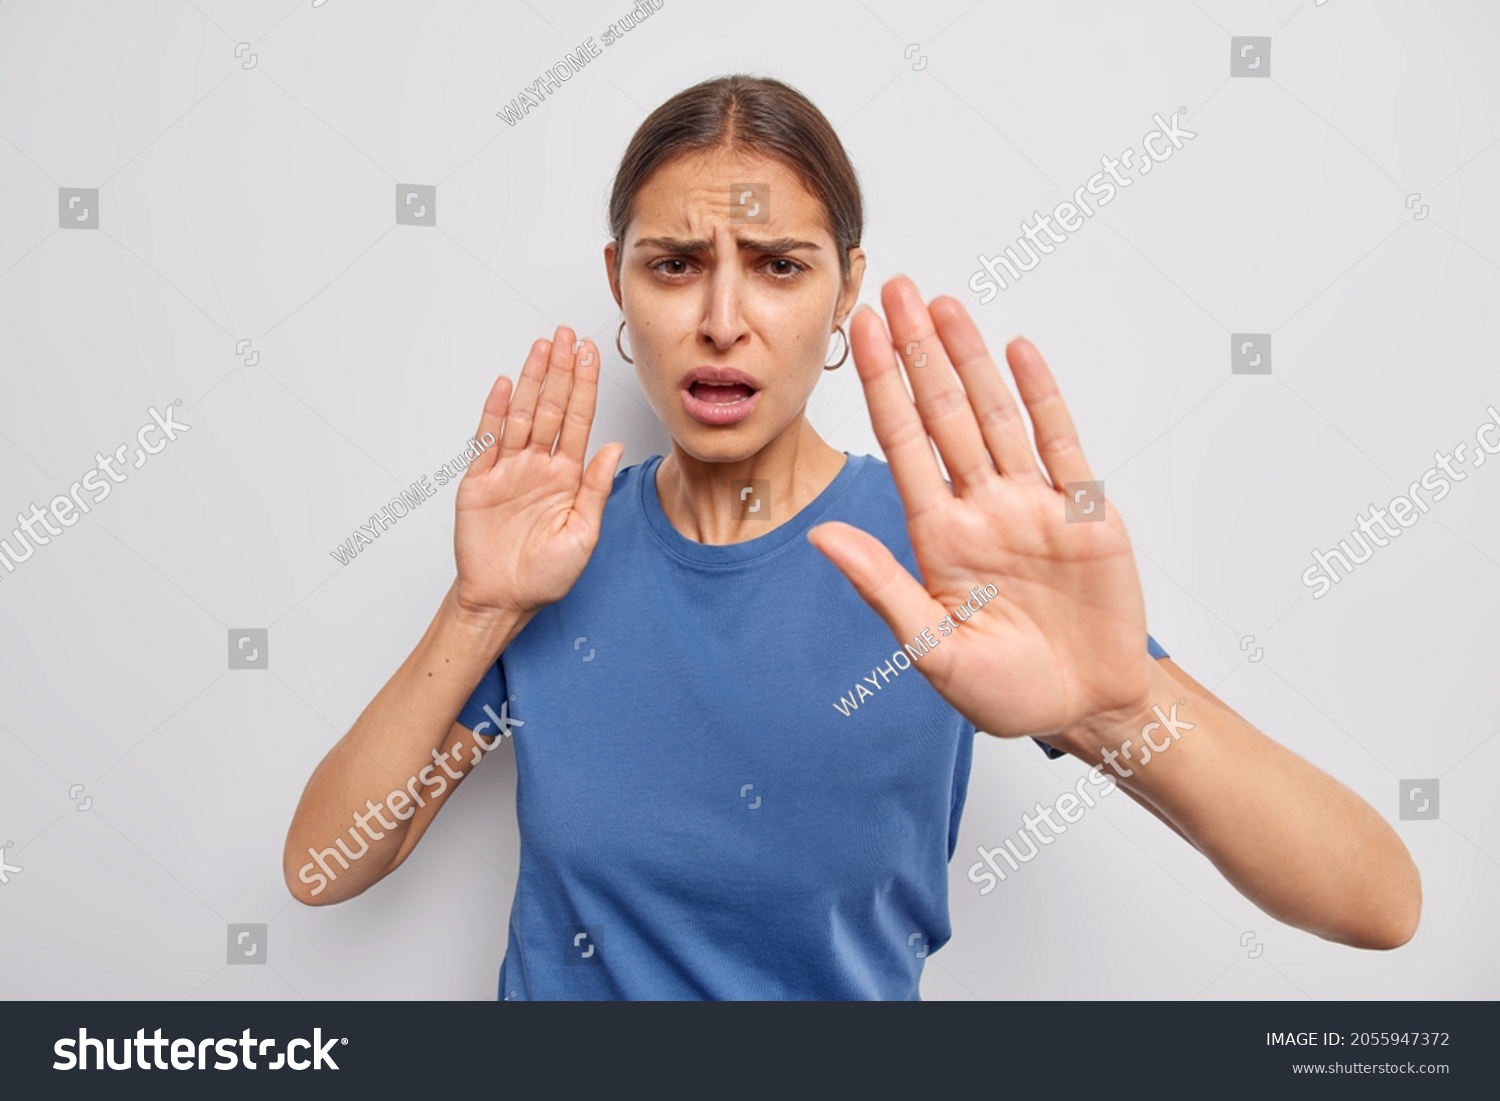 Do not come closer. Displeased woman shows her denial opinion says stay away from me calm down or slow asks to keep distance demonstrates taboo gesture dressed casually isolated over white wall #2055947372